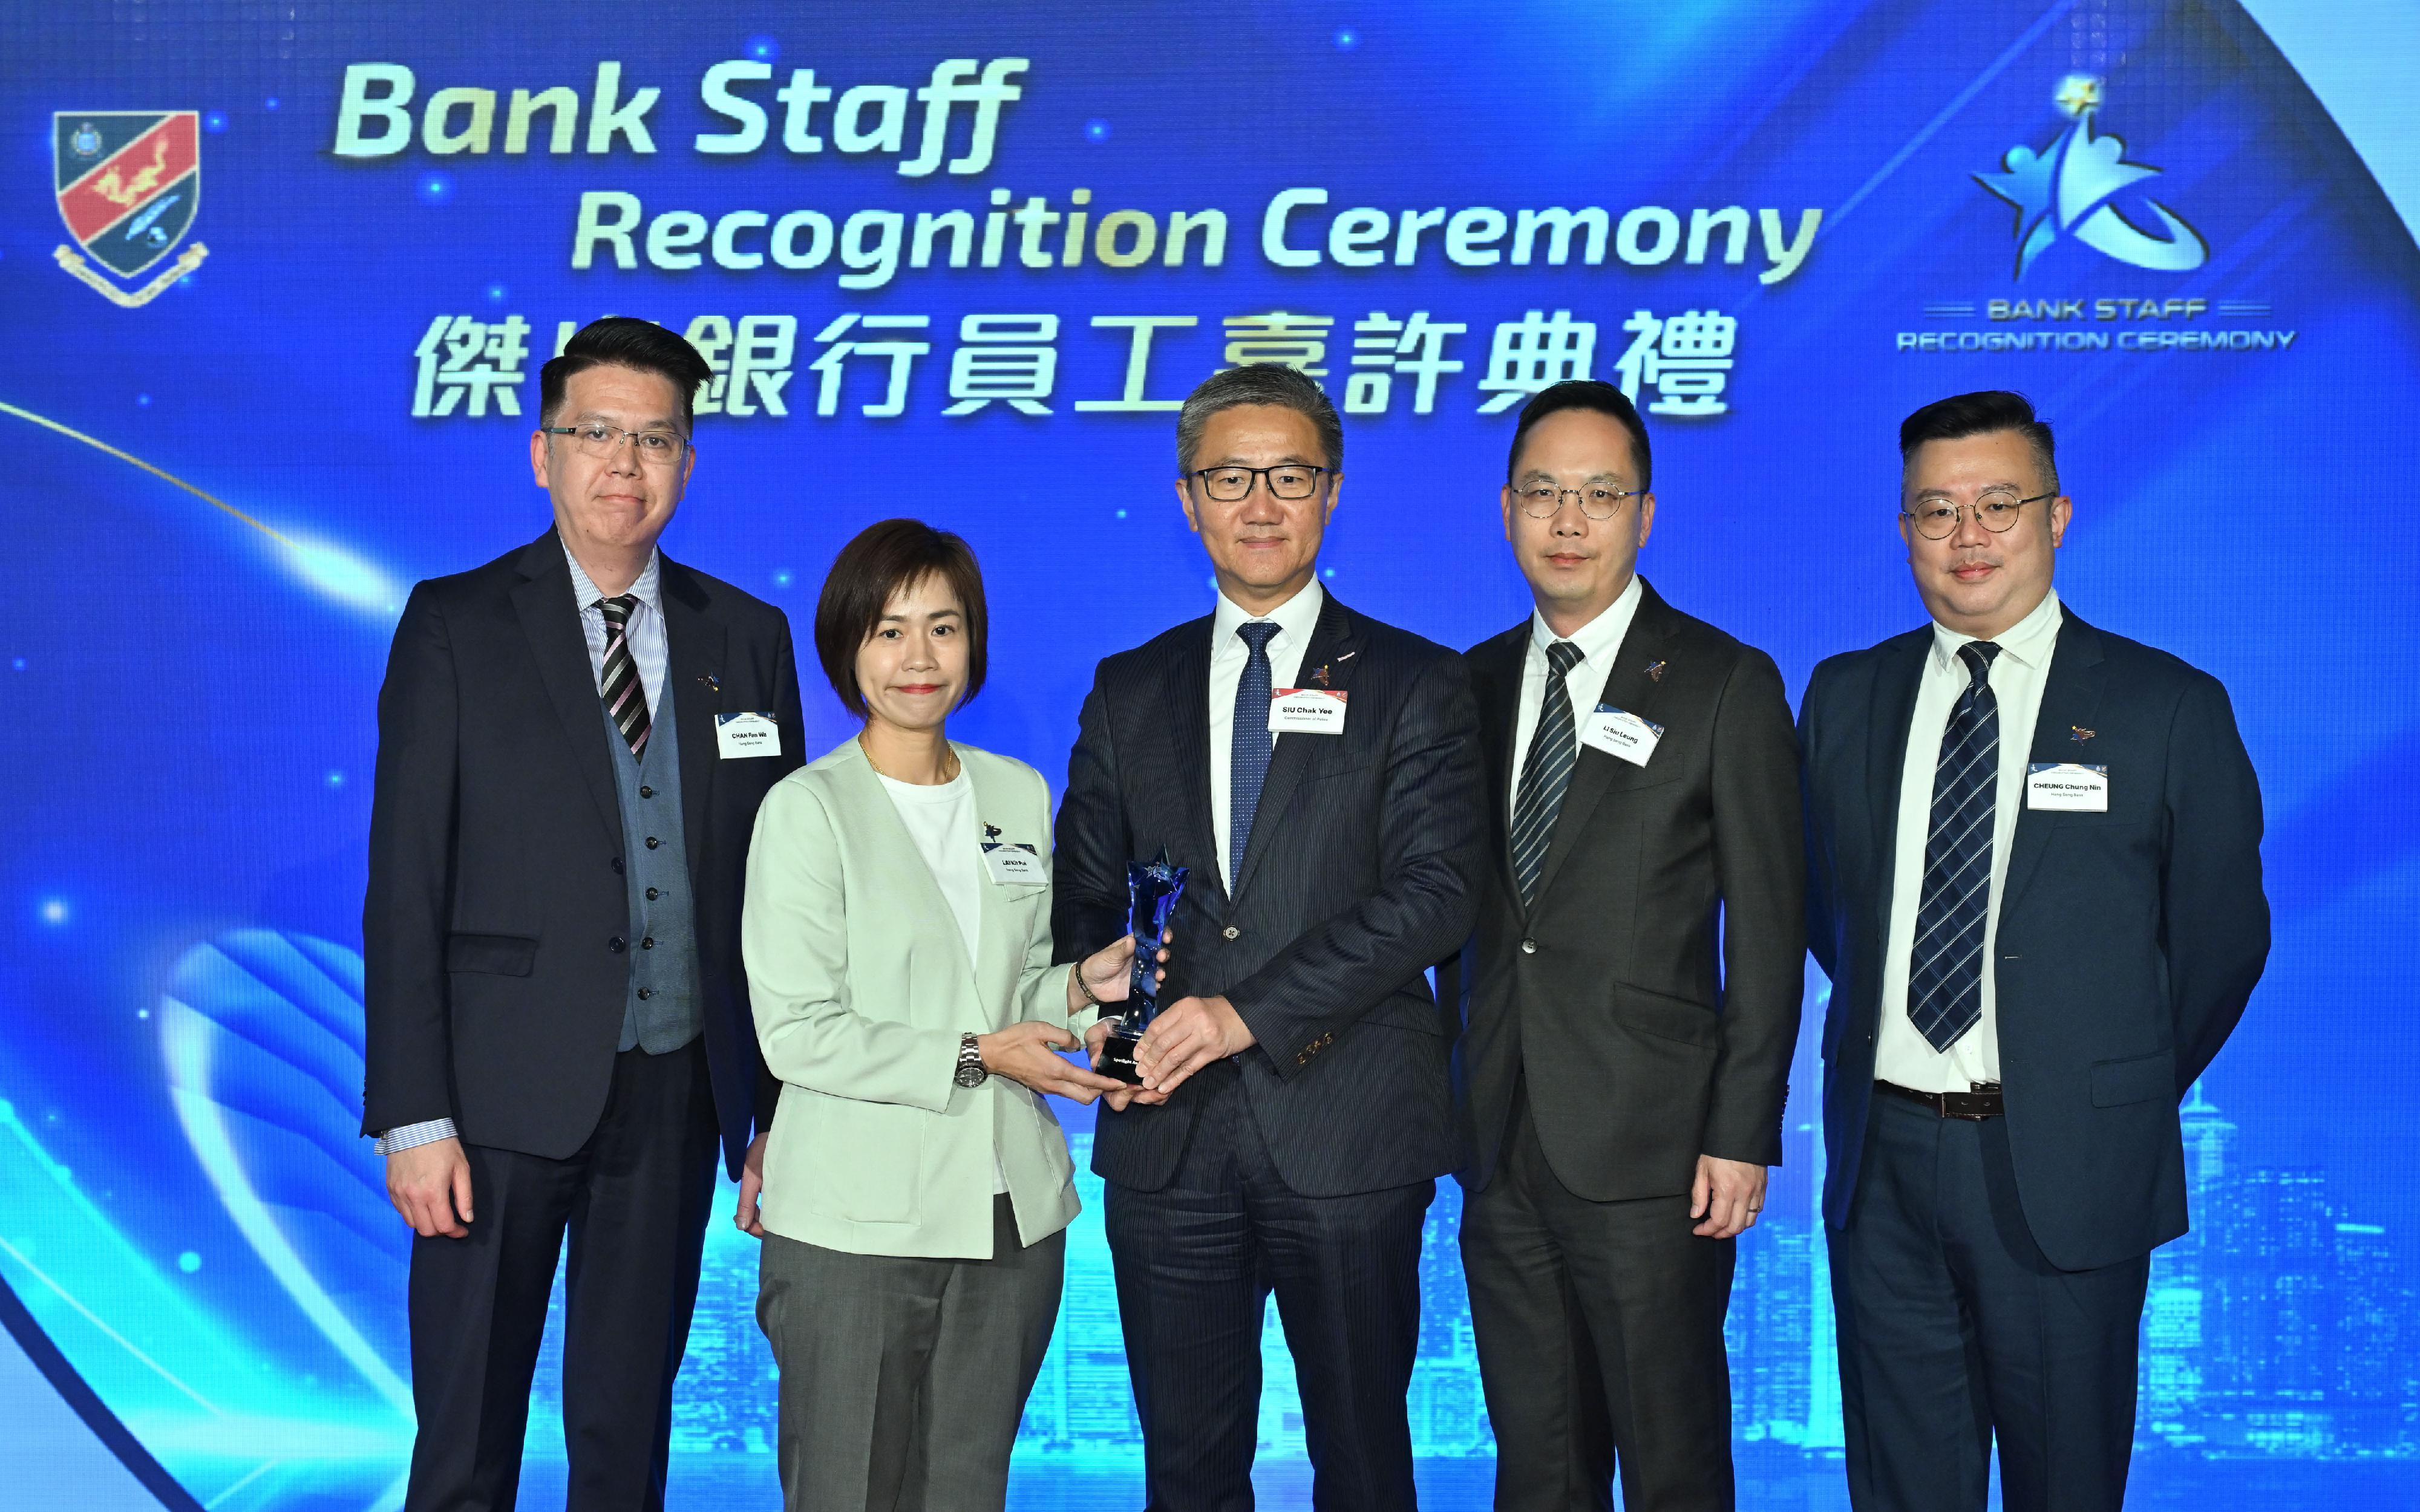 The Bank Staff Recognition Ceremony organised by the Hong Kong Police Force was held today (March 22). Photo shows the Commissioner of Police, Mr Siu Chak-yee (center), presenting the Spotlight Award to the bank representatives.